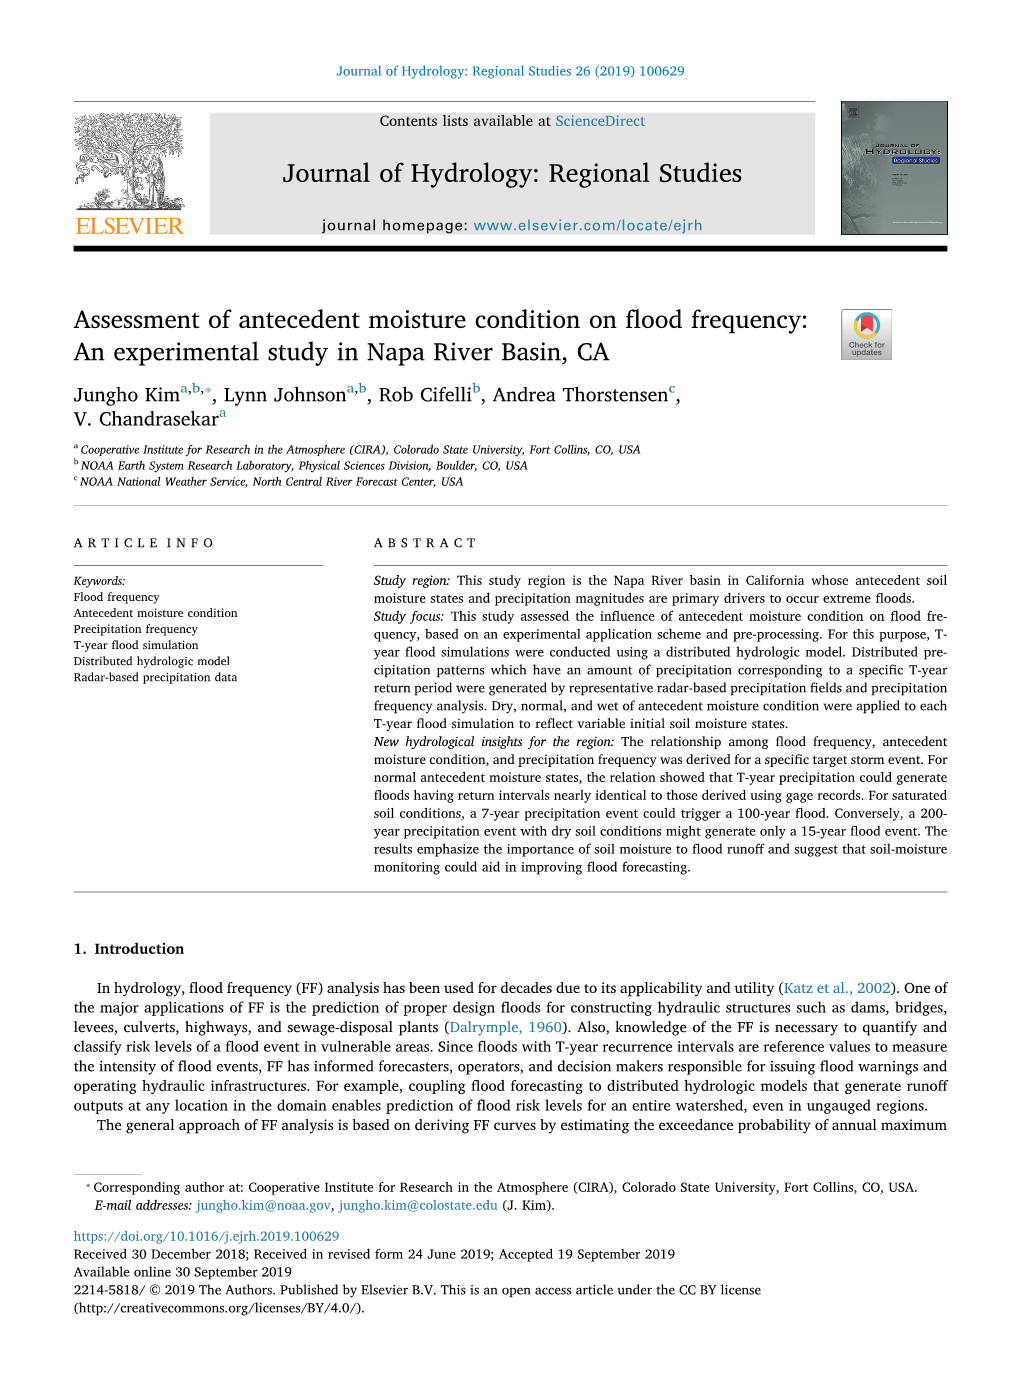 Assessment of Antecedent Moisture Condition on Flood Frequency An